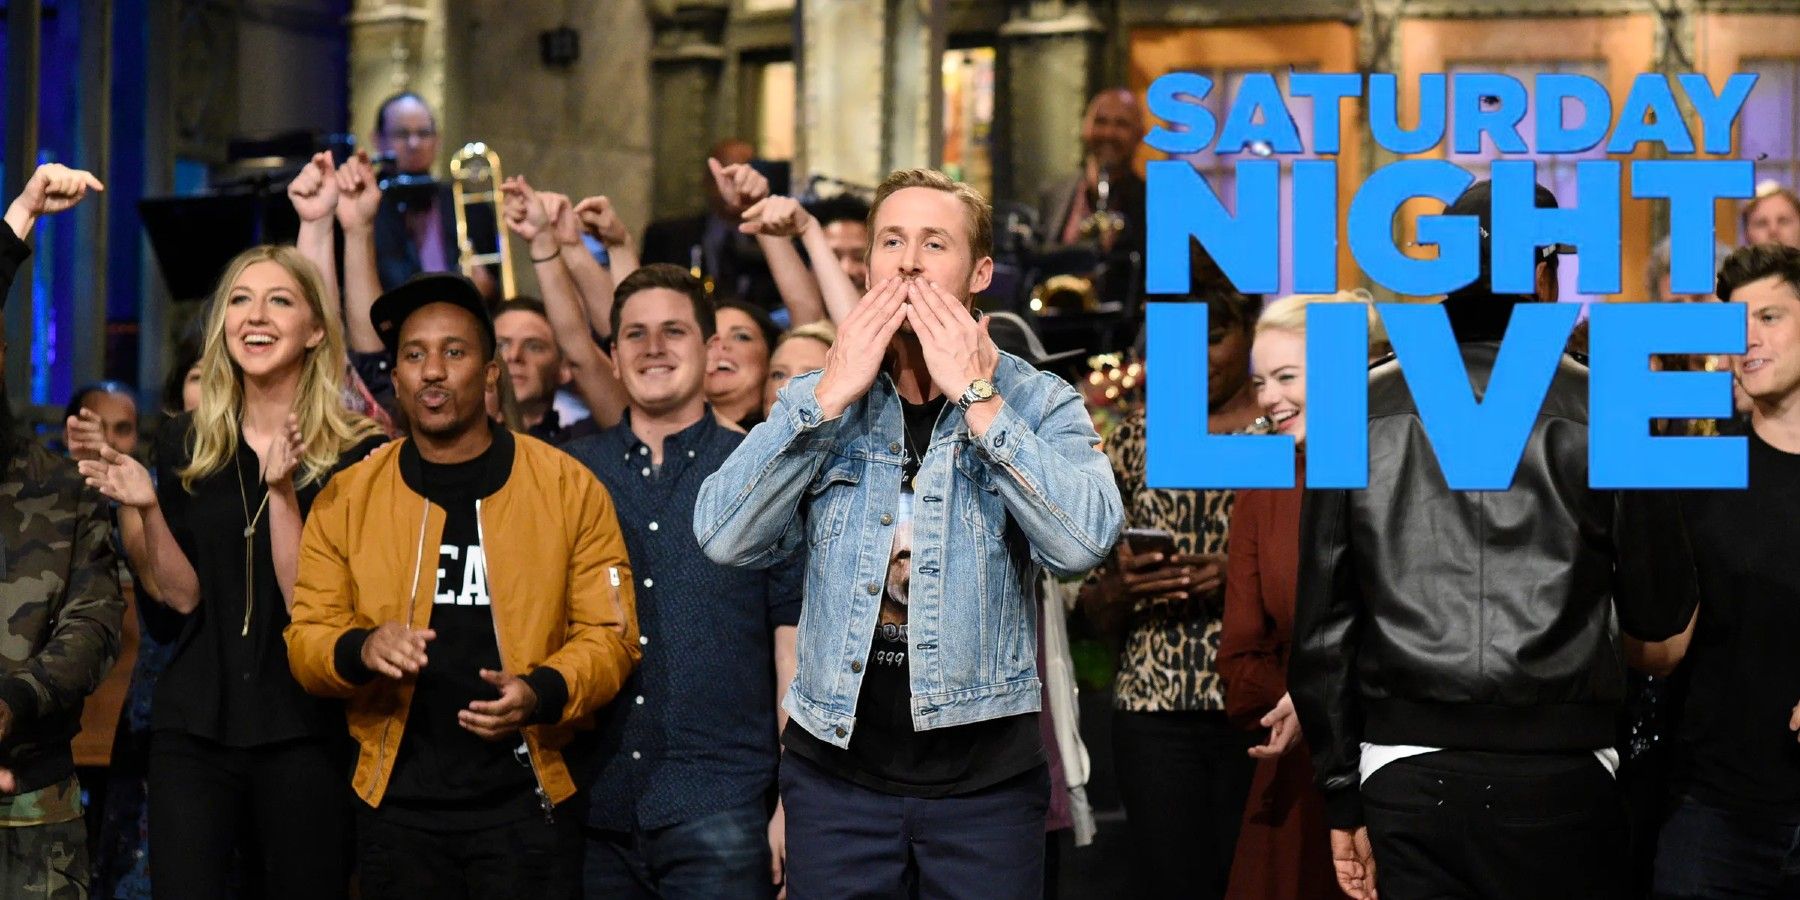 Ryan Gosling and the cast of Saturday Night Live on stage at the end of the show